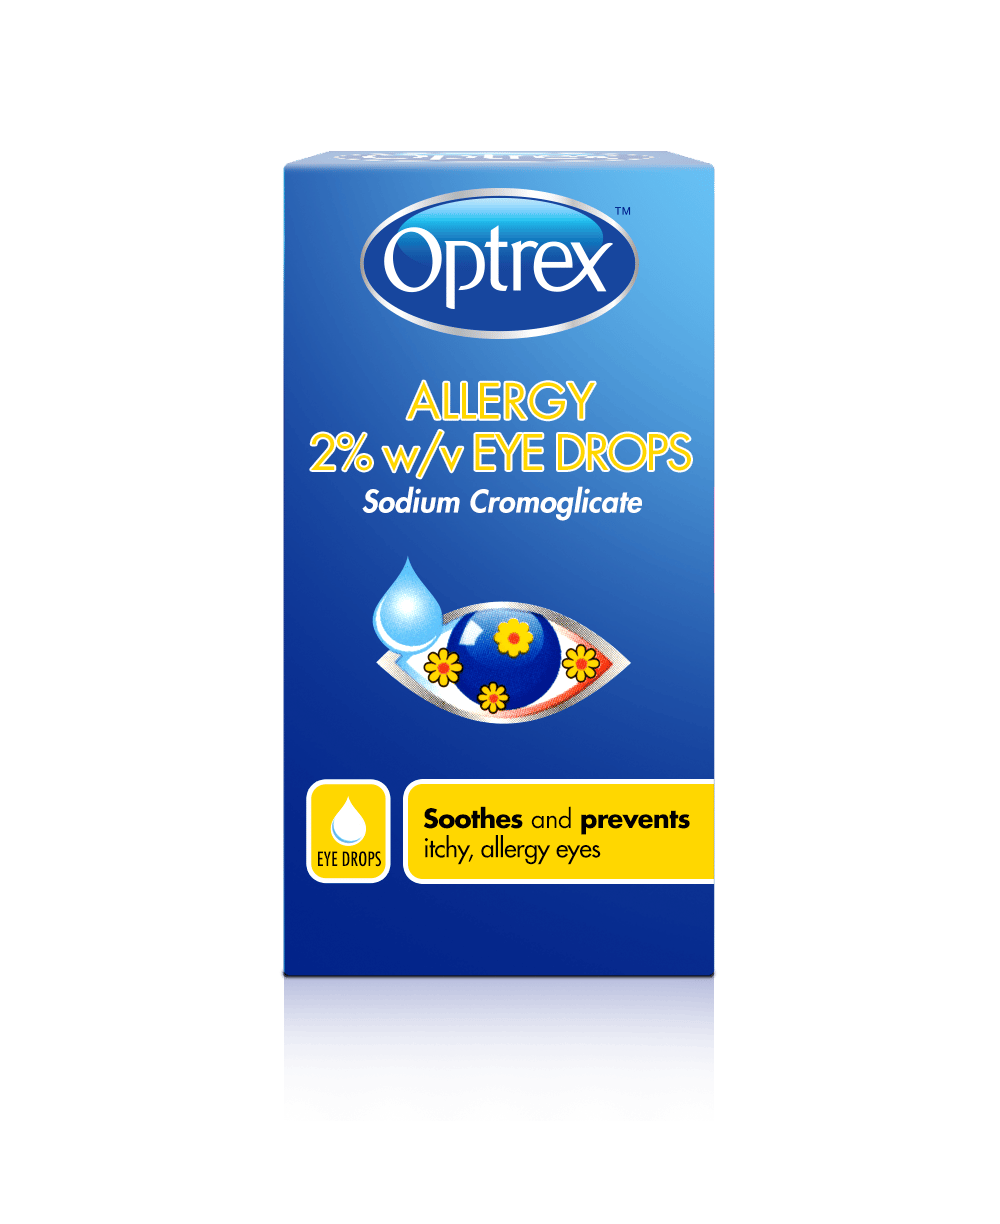 Suffering with eye allergies? Optrex allergy eye drops can help